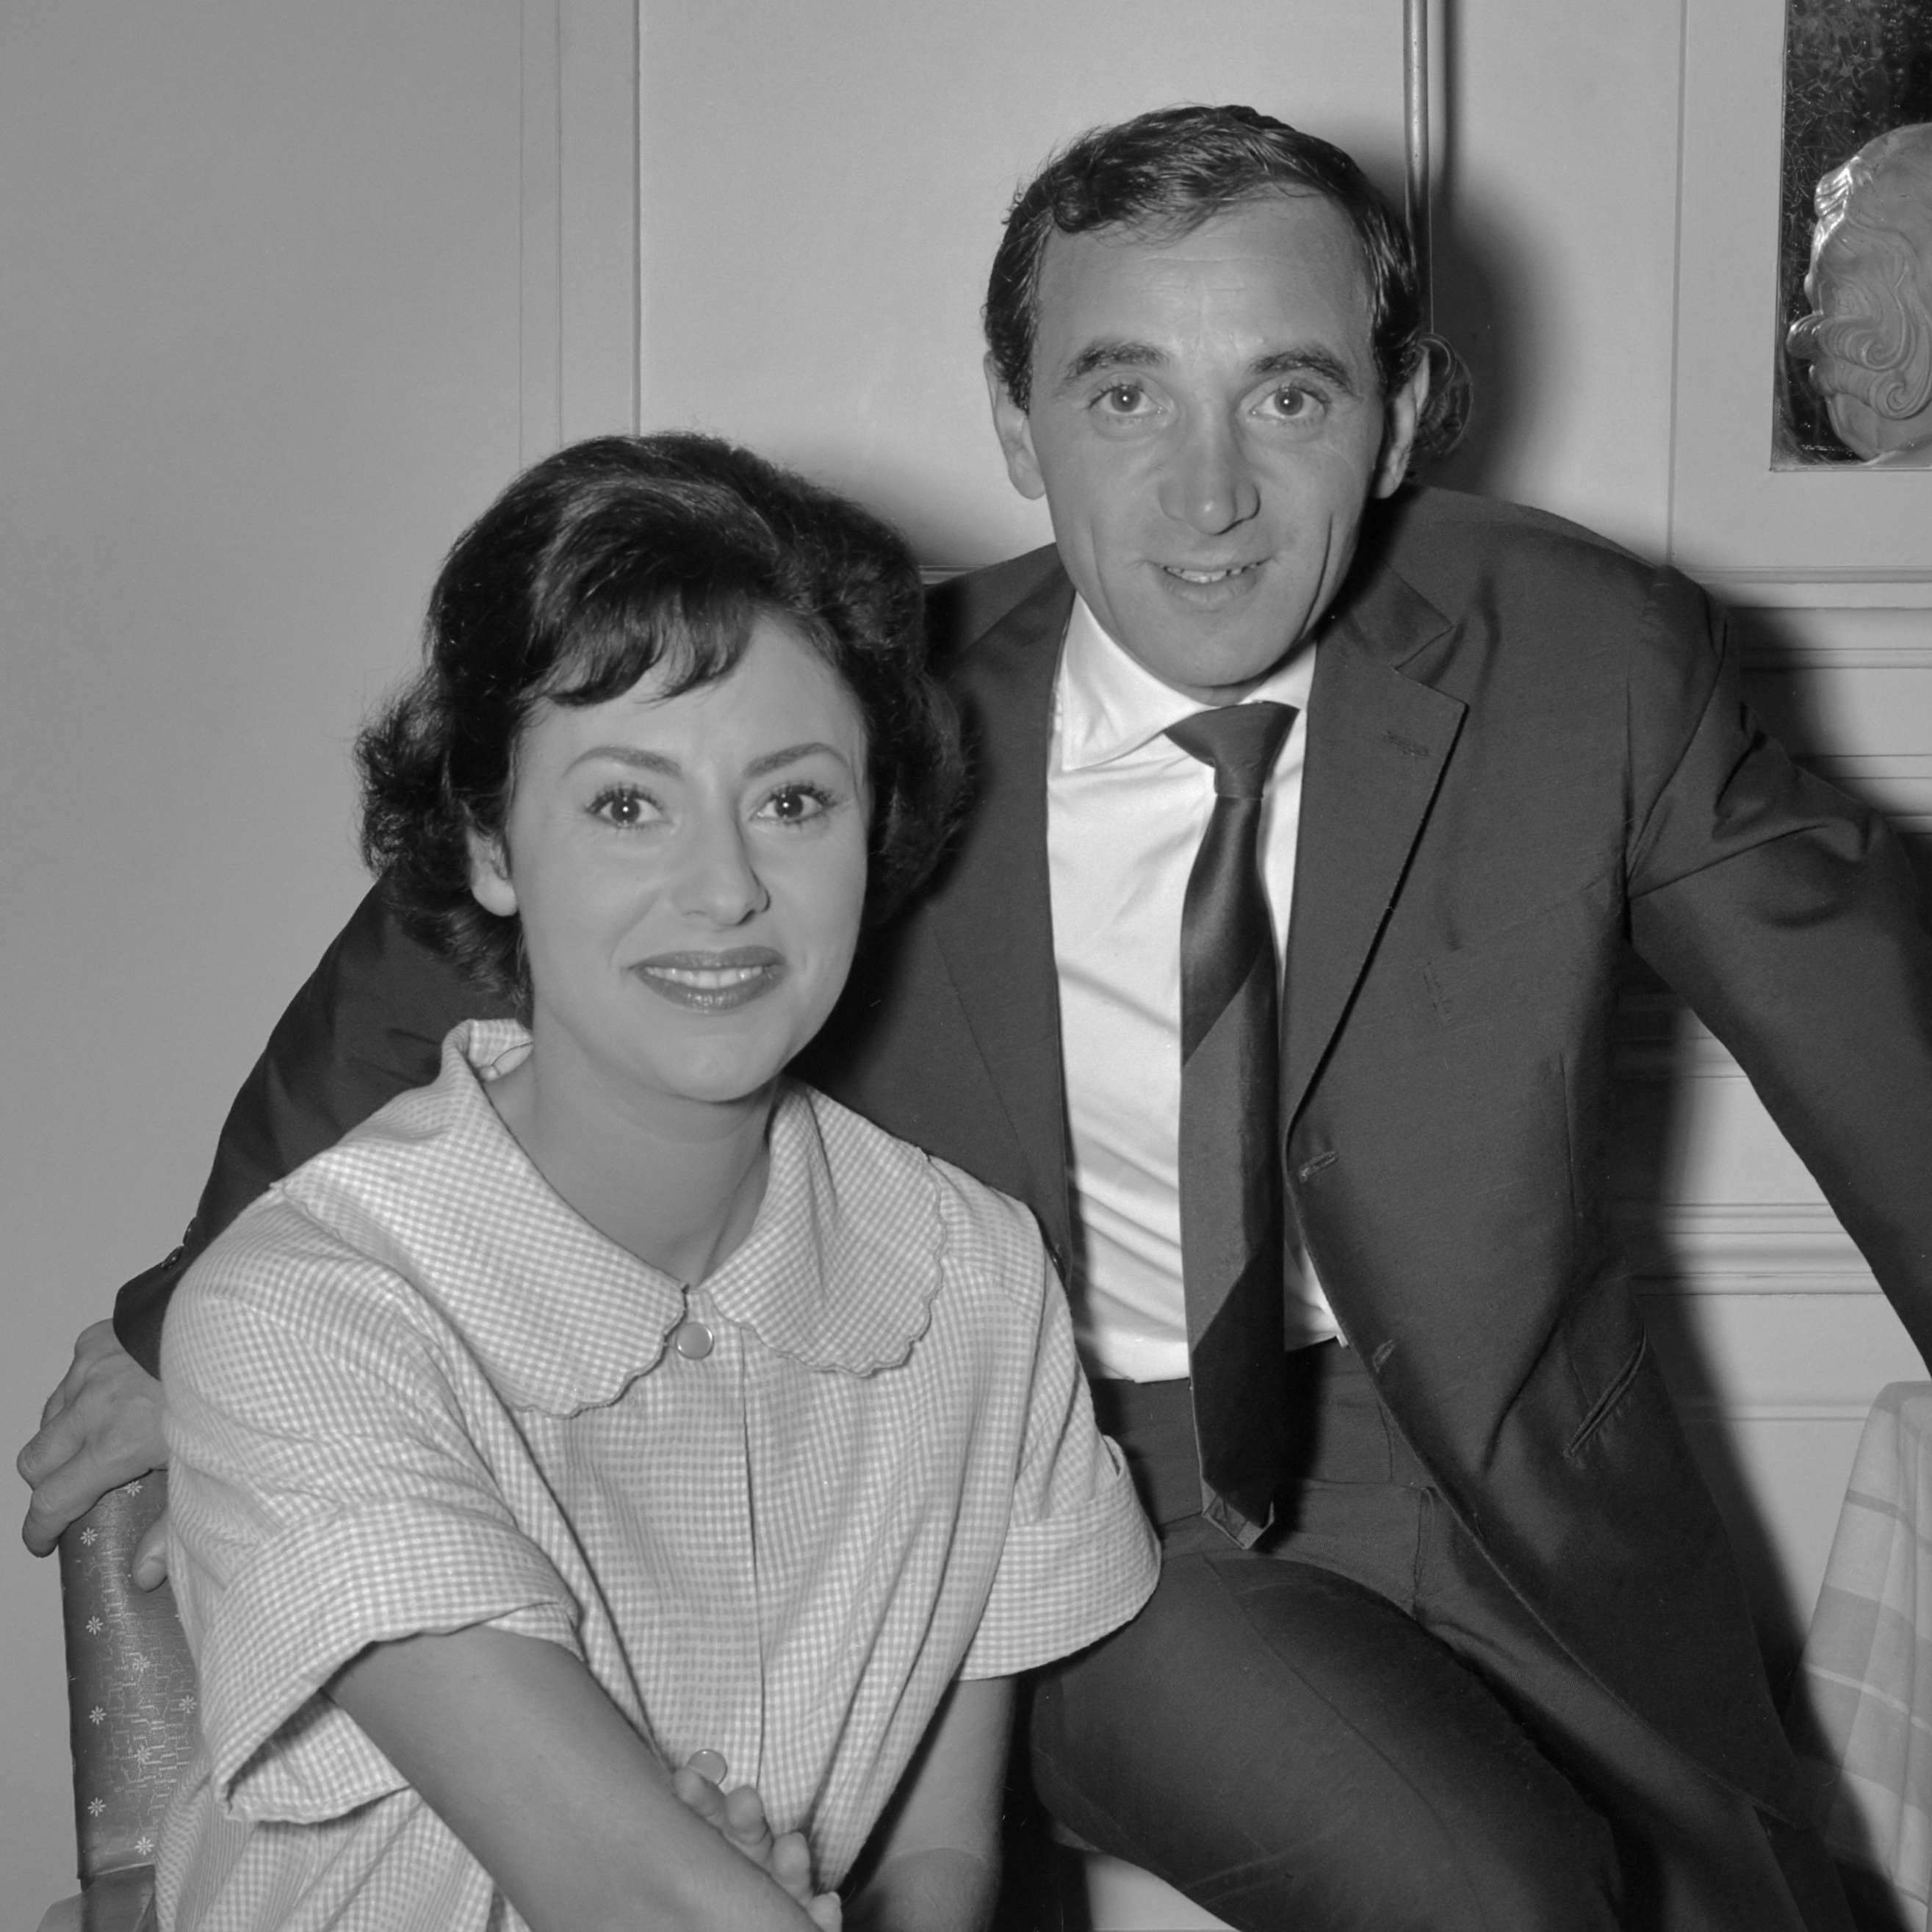 Wikipedia, Caterina Valente, Charles Aznavour, Grand Gala du Disque, Images from Anefo, Images from 